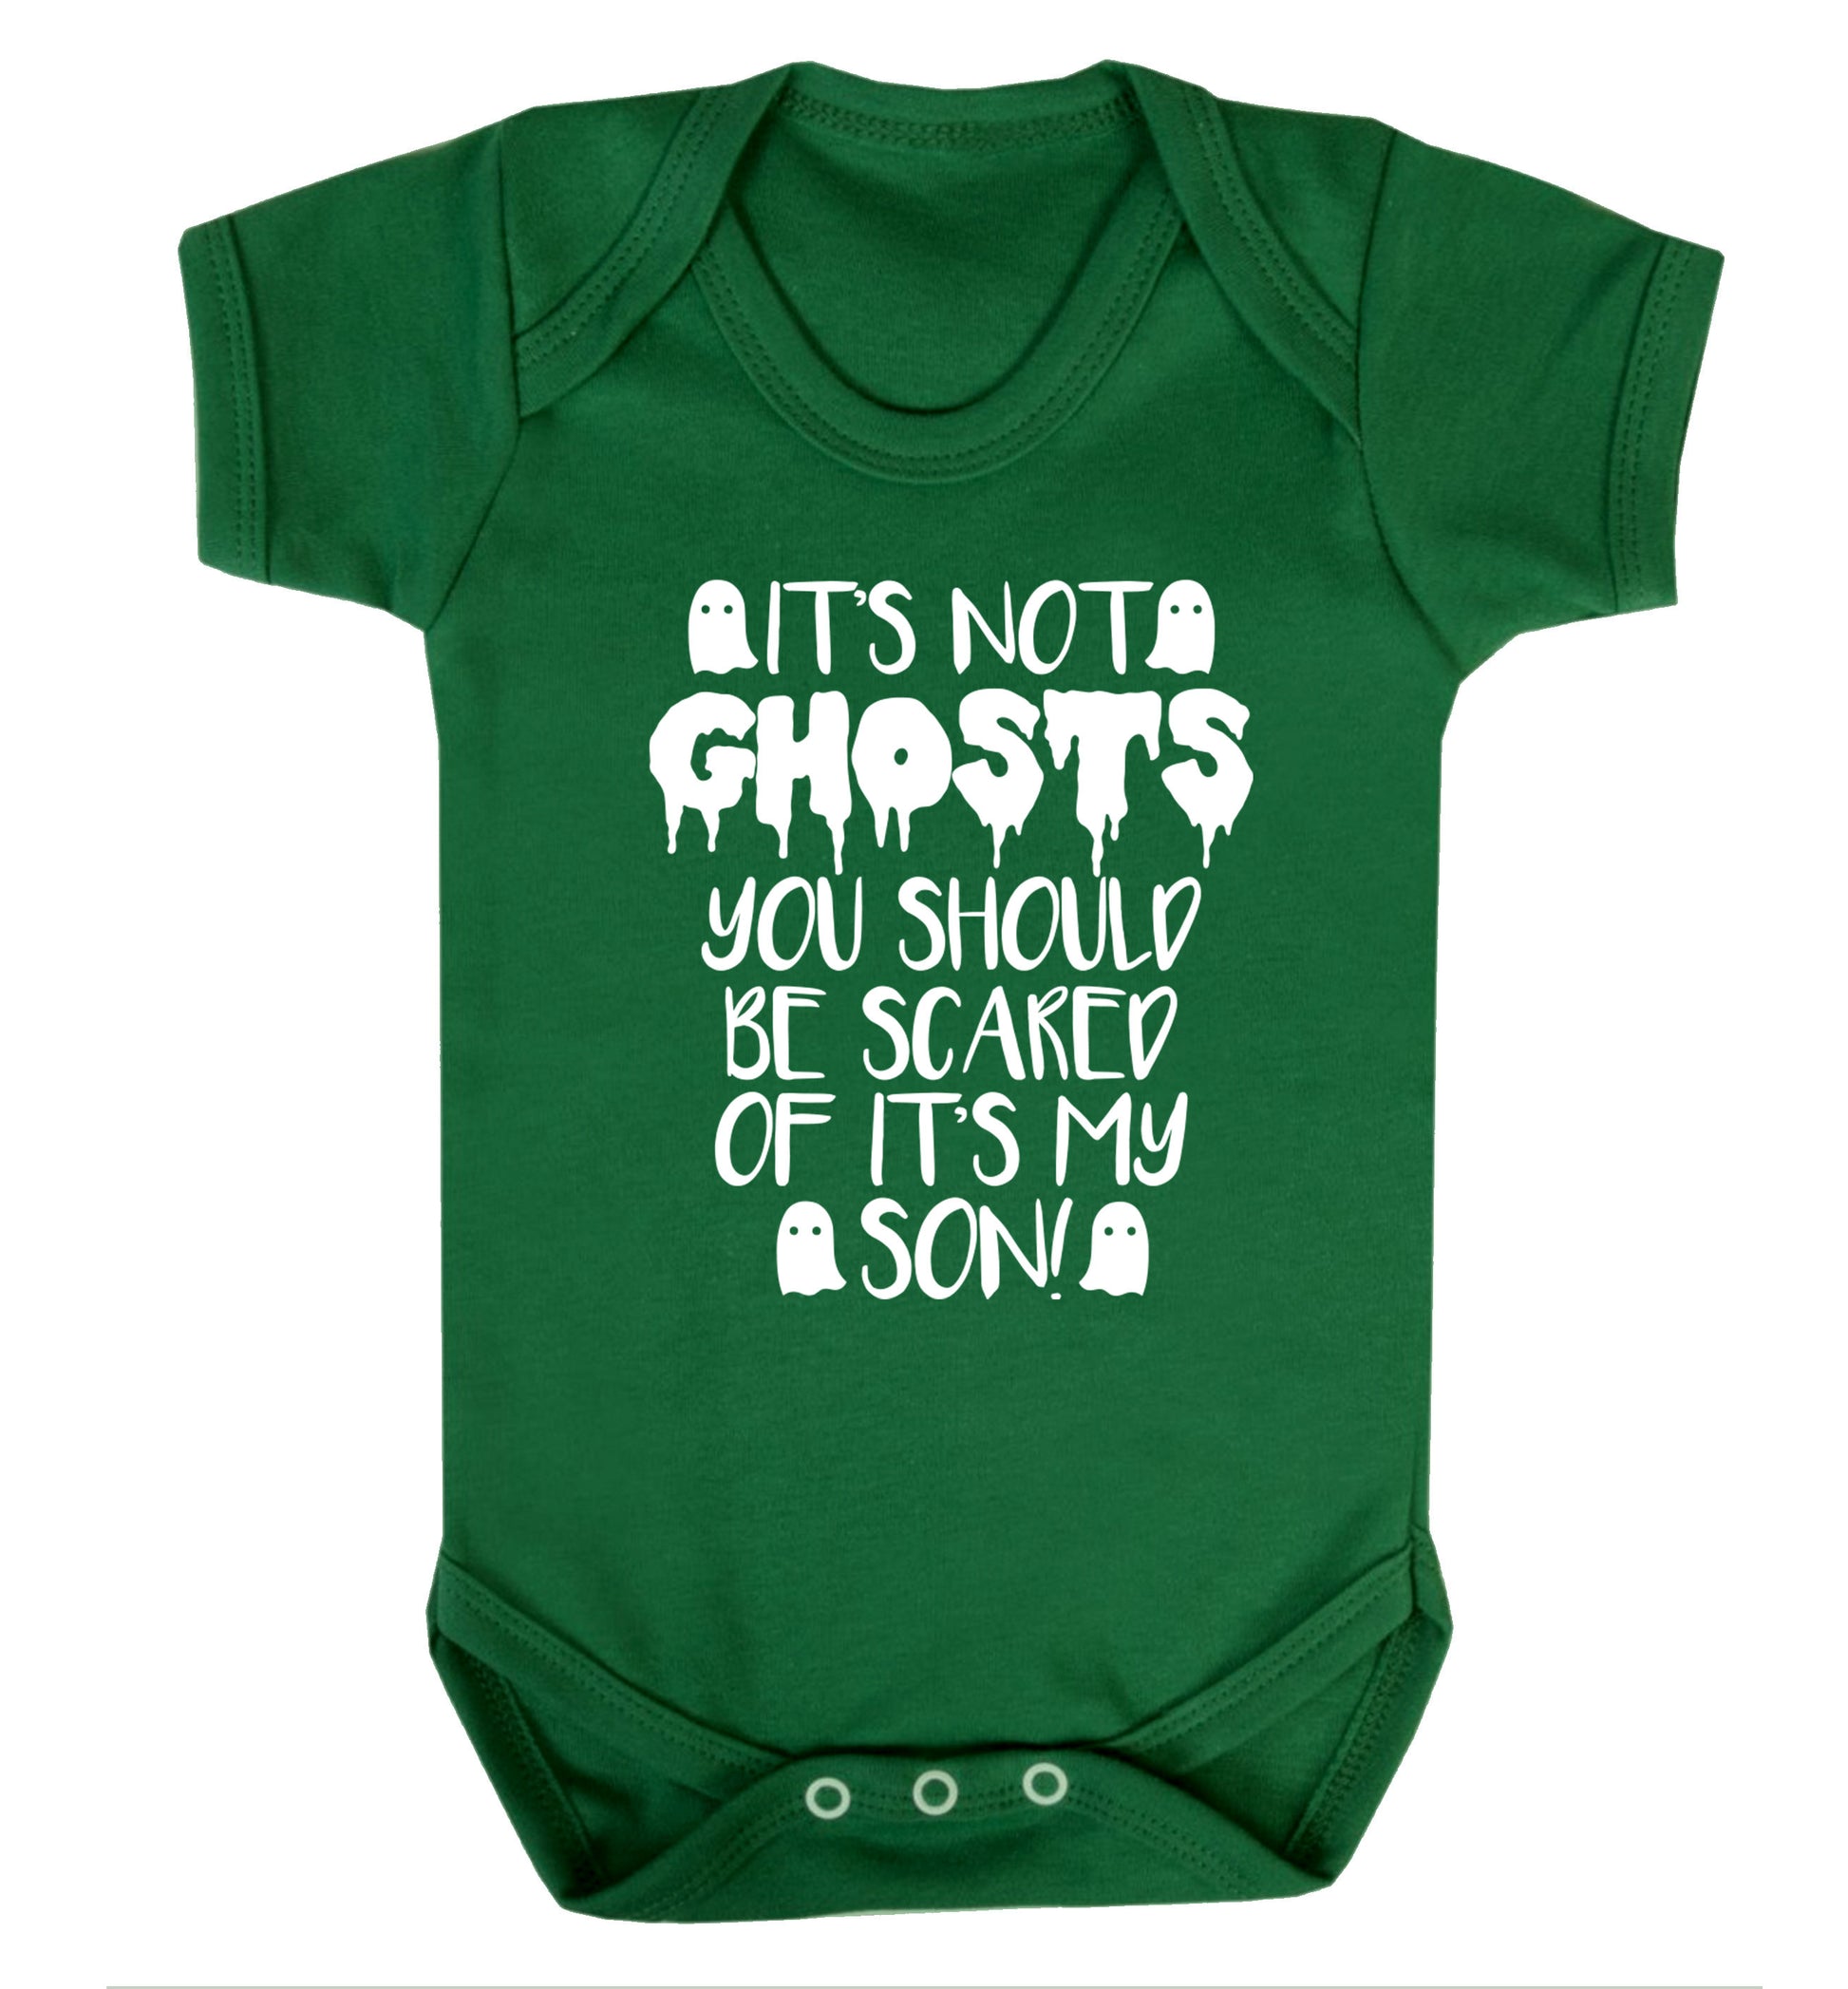 It's not ghosts you should be scared of it's my son! Baby Vest green 18-24 months